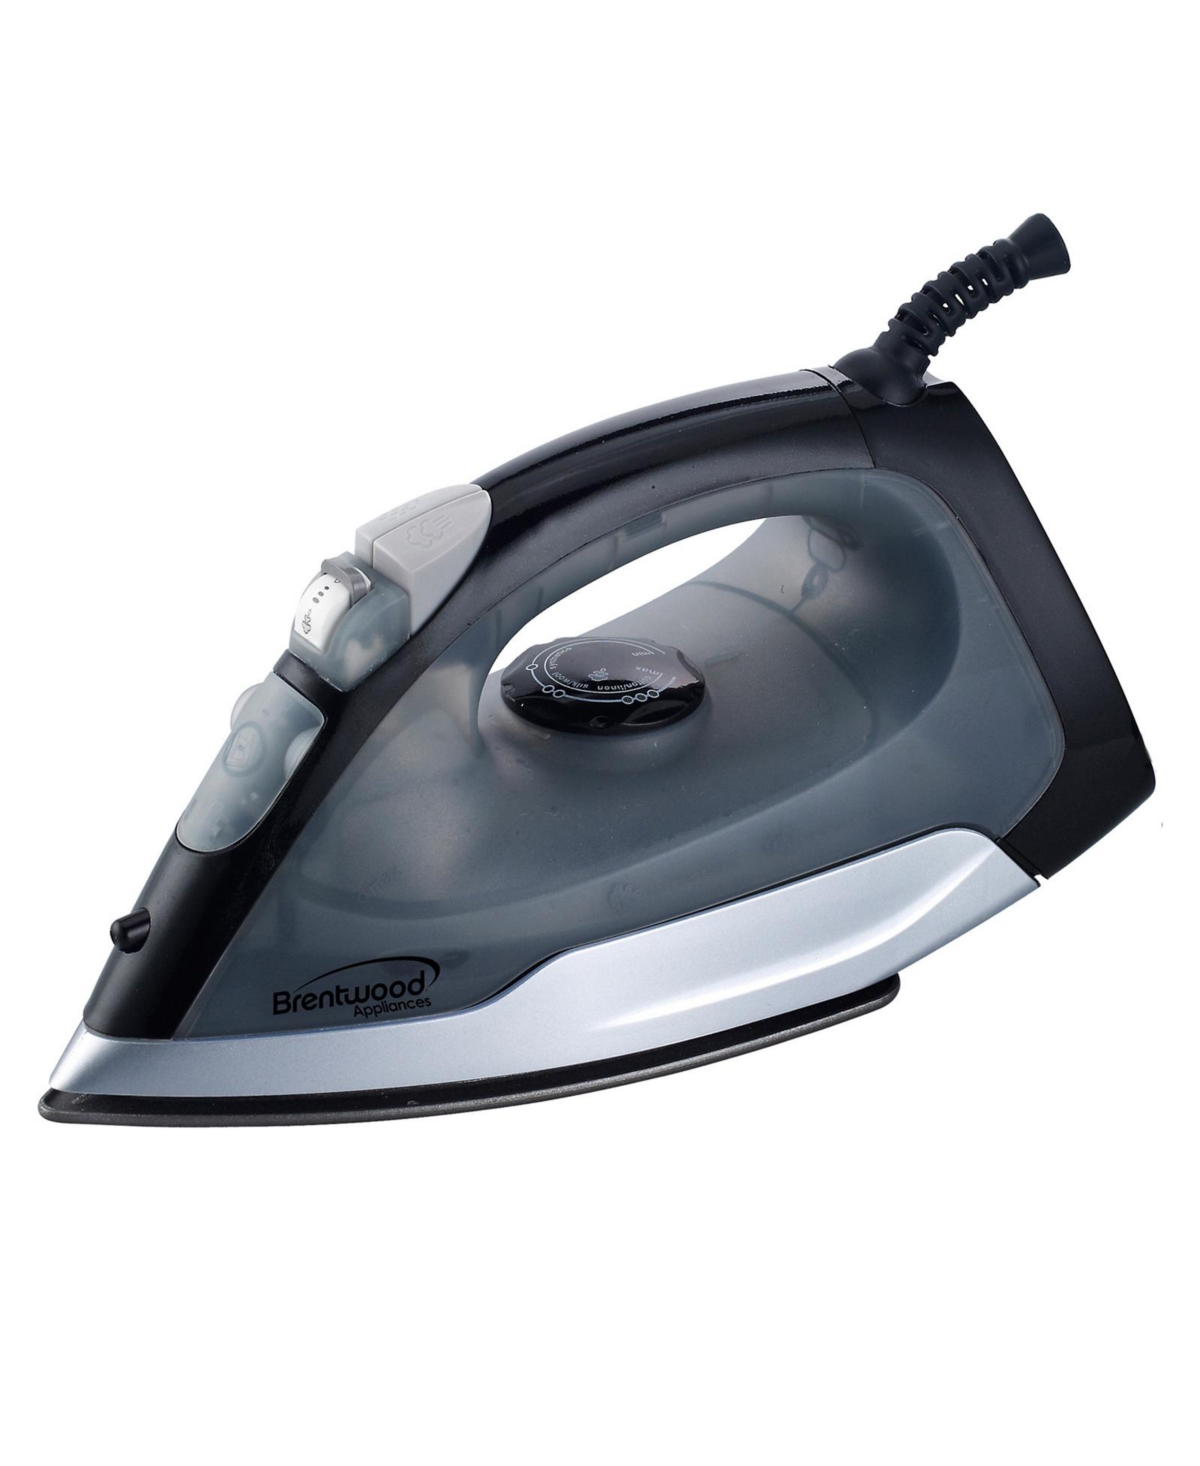 Brentwood Full Size Steam / Spray / Dry Iron in Black and Gray - Black